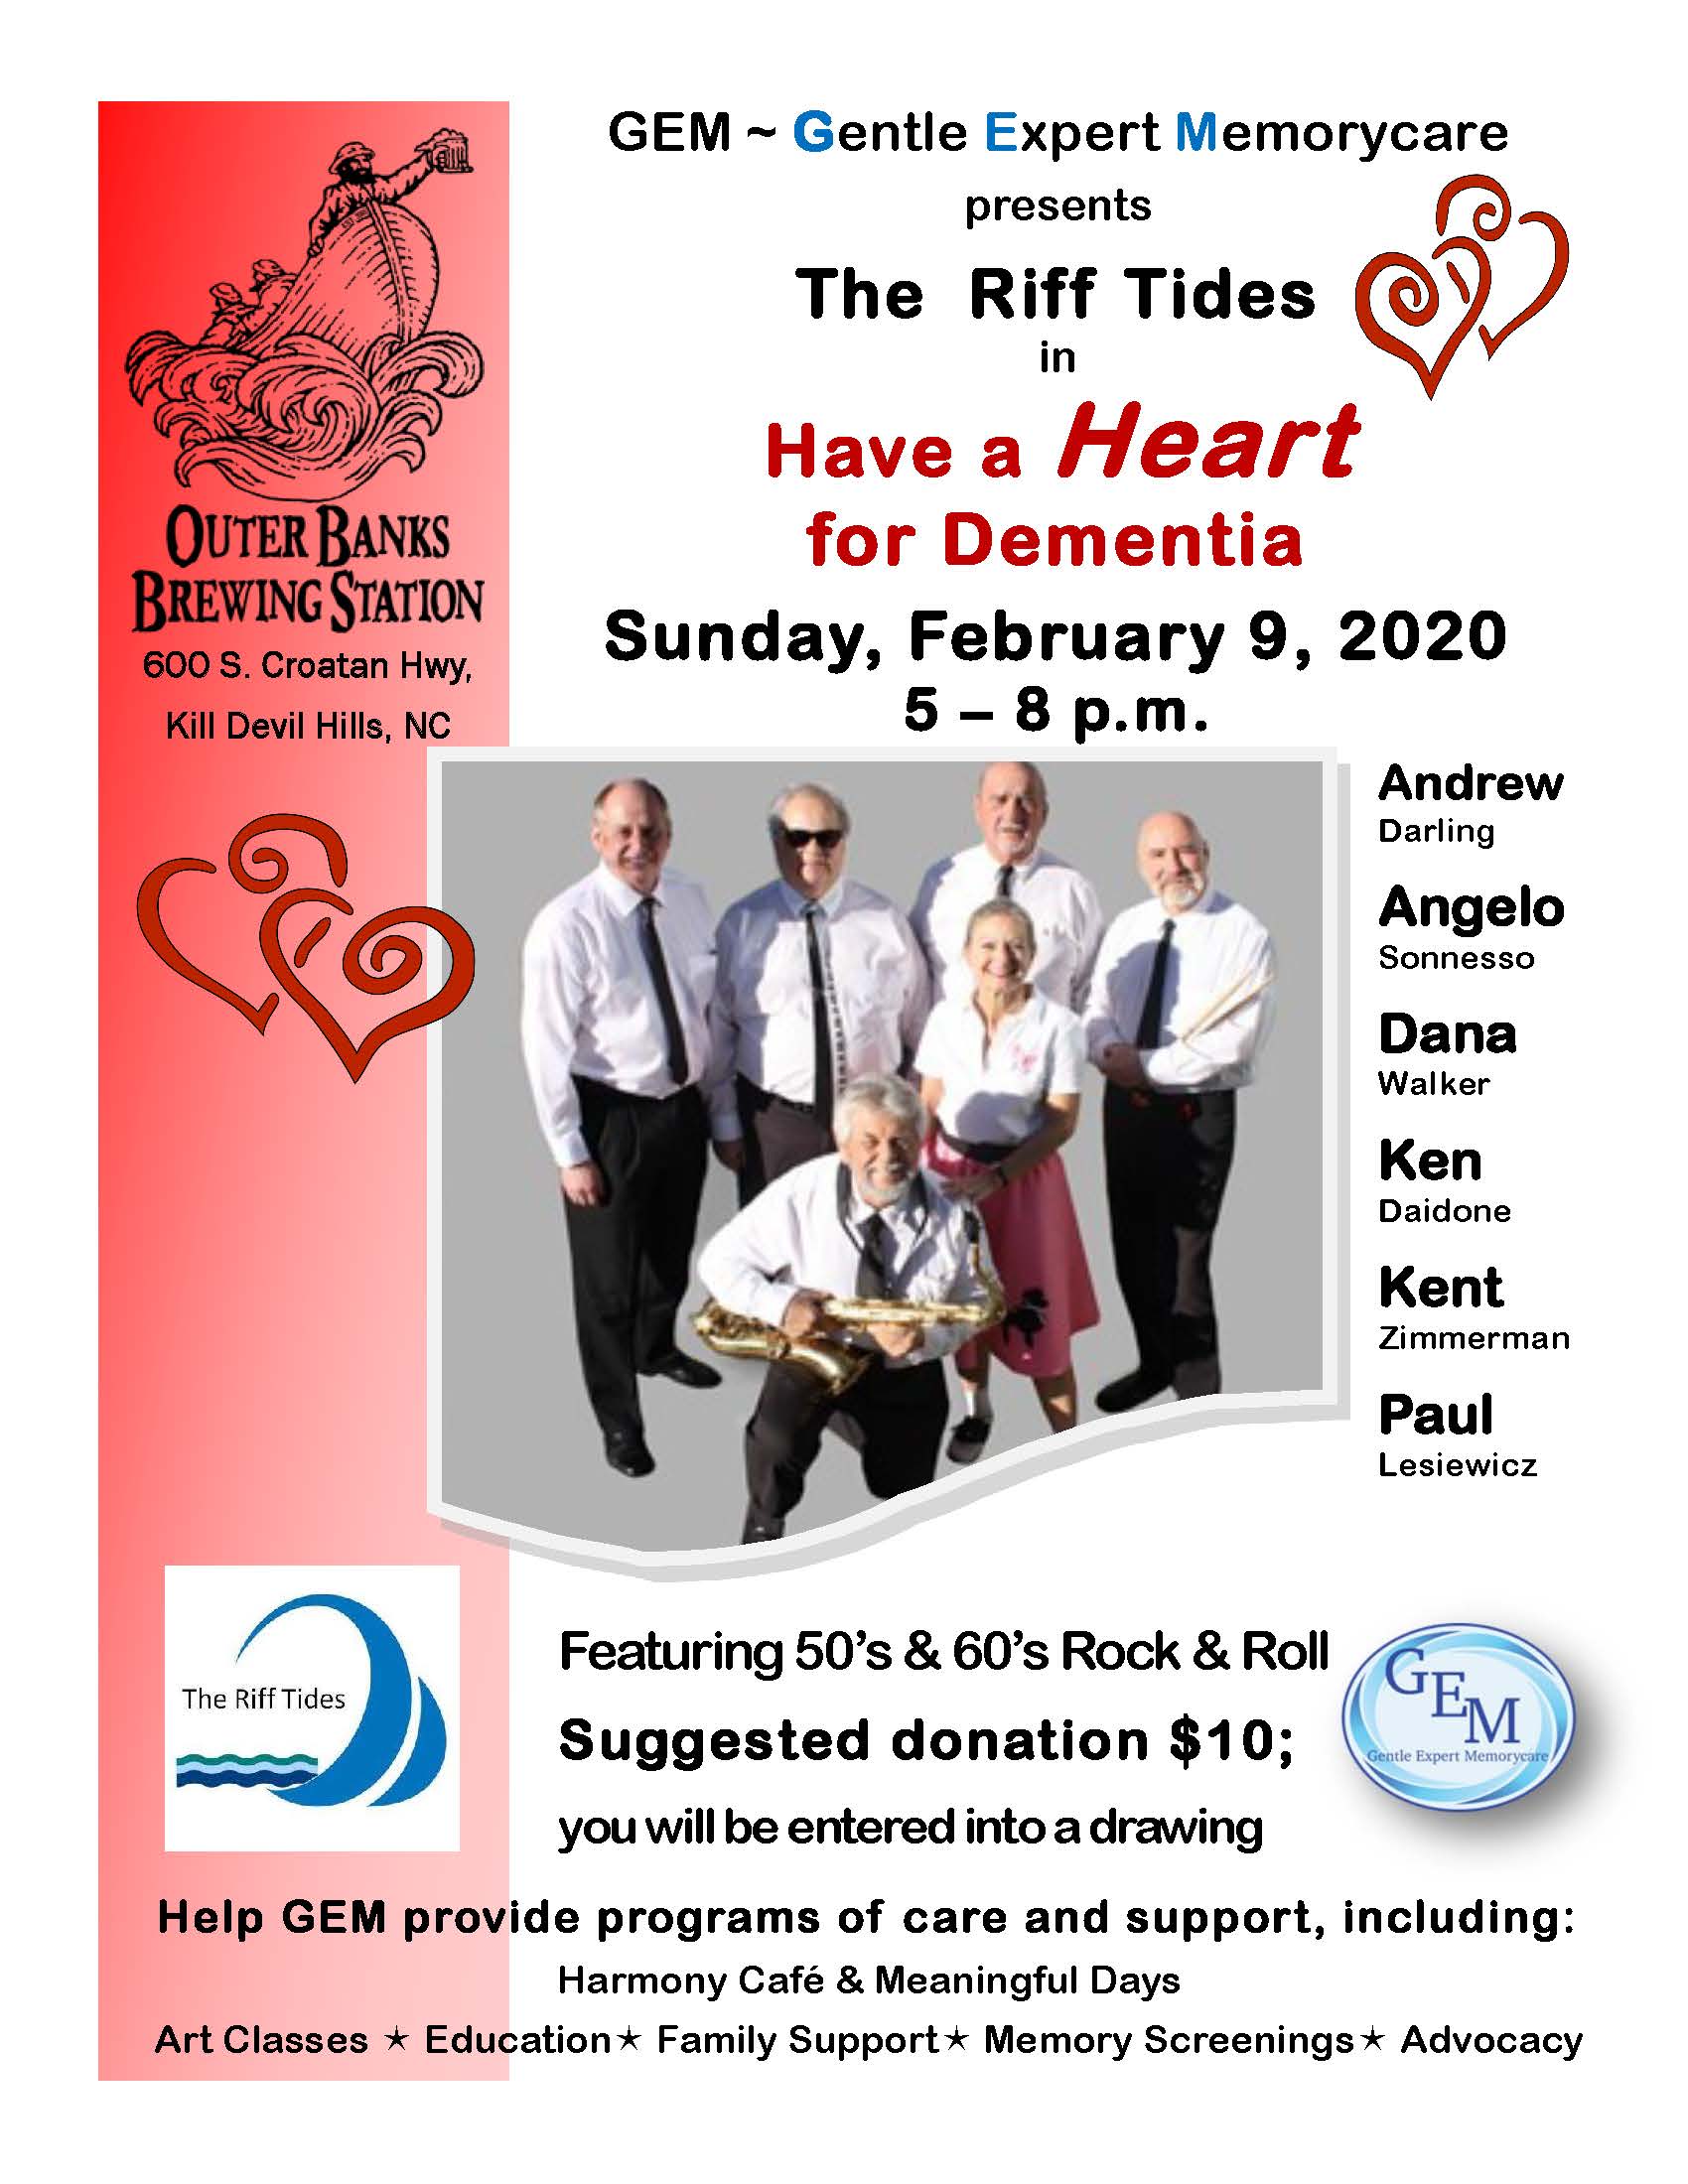 Have a Heart for Dementia 2020